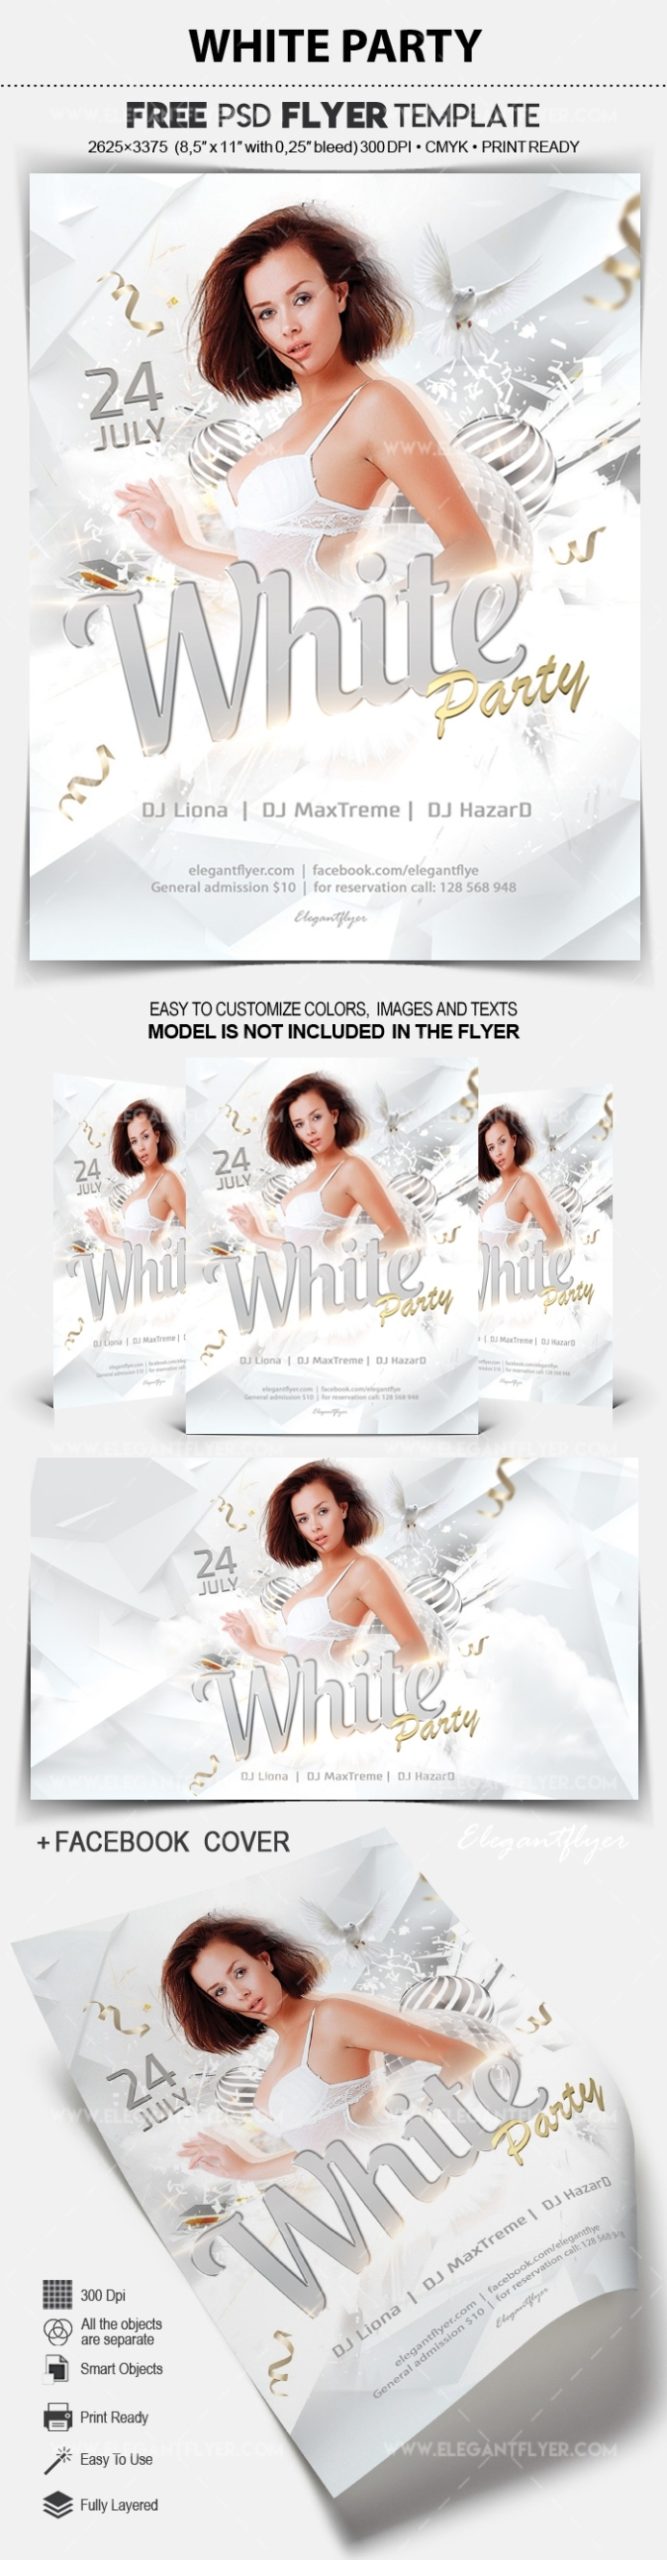 All White Party Flyer Template Free Psd - Garden Bugs with regard to Free All White Party Flyer Template